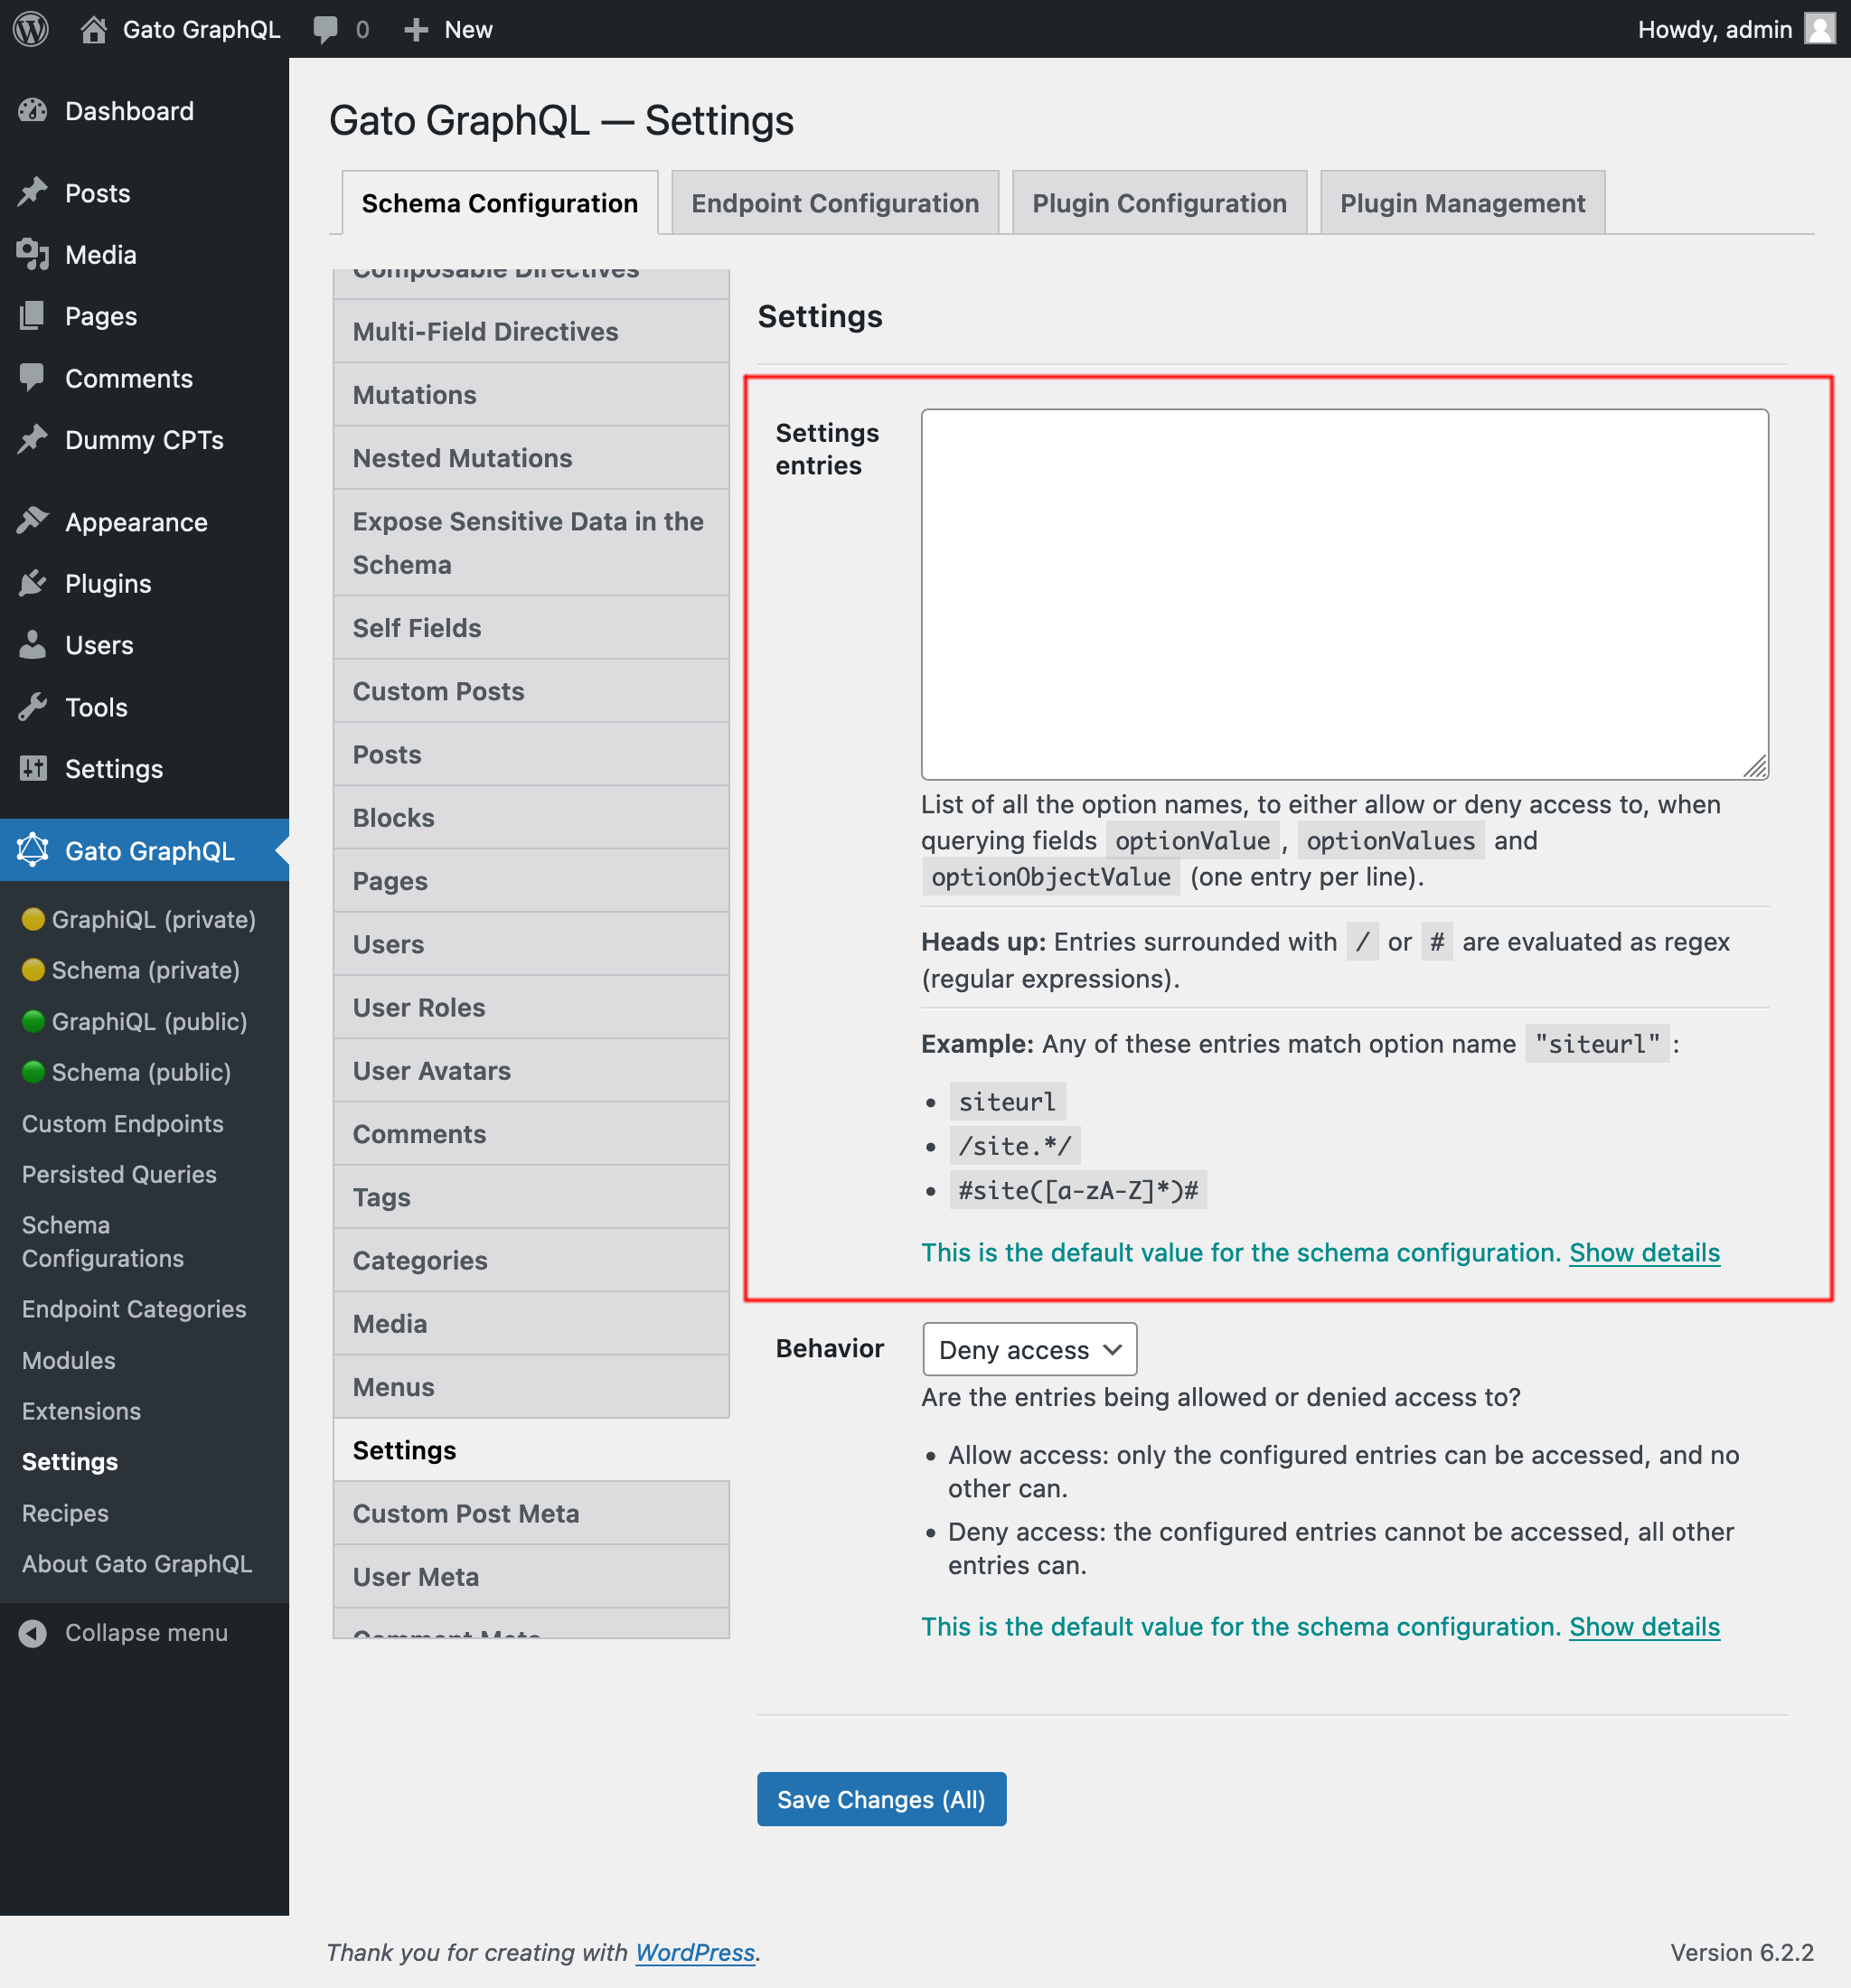 Adding options to the allowlist in the Settings page